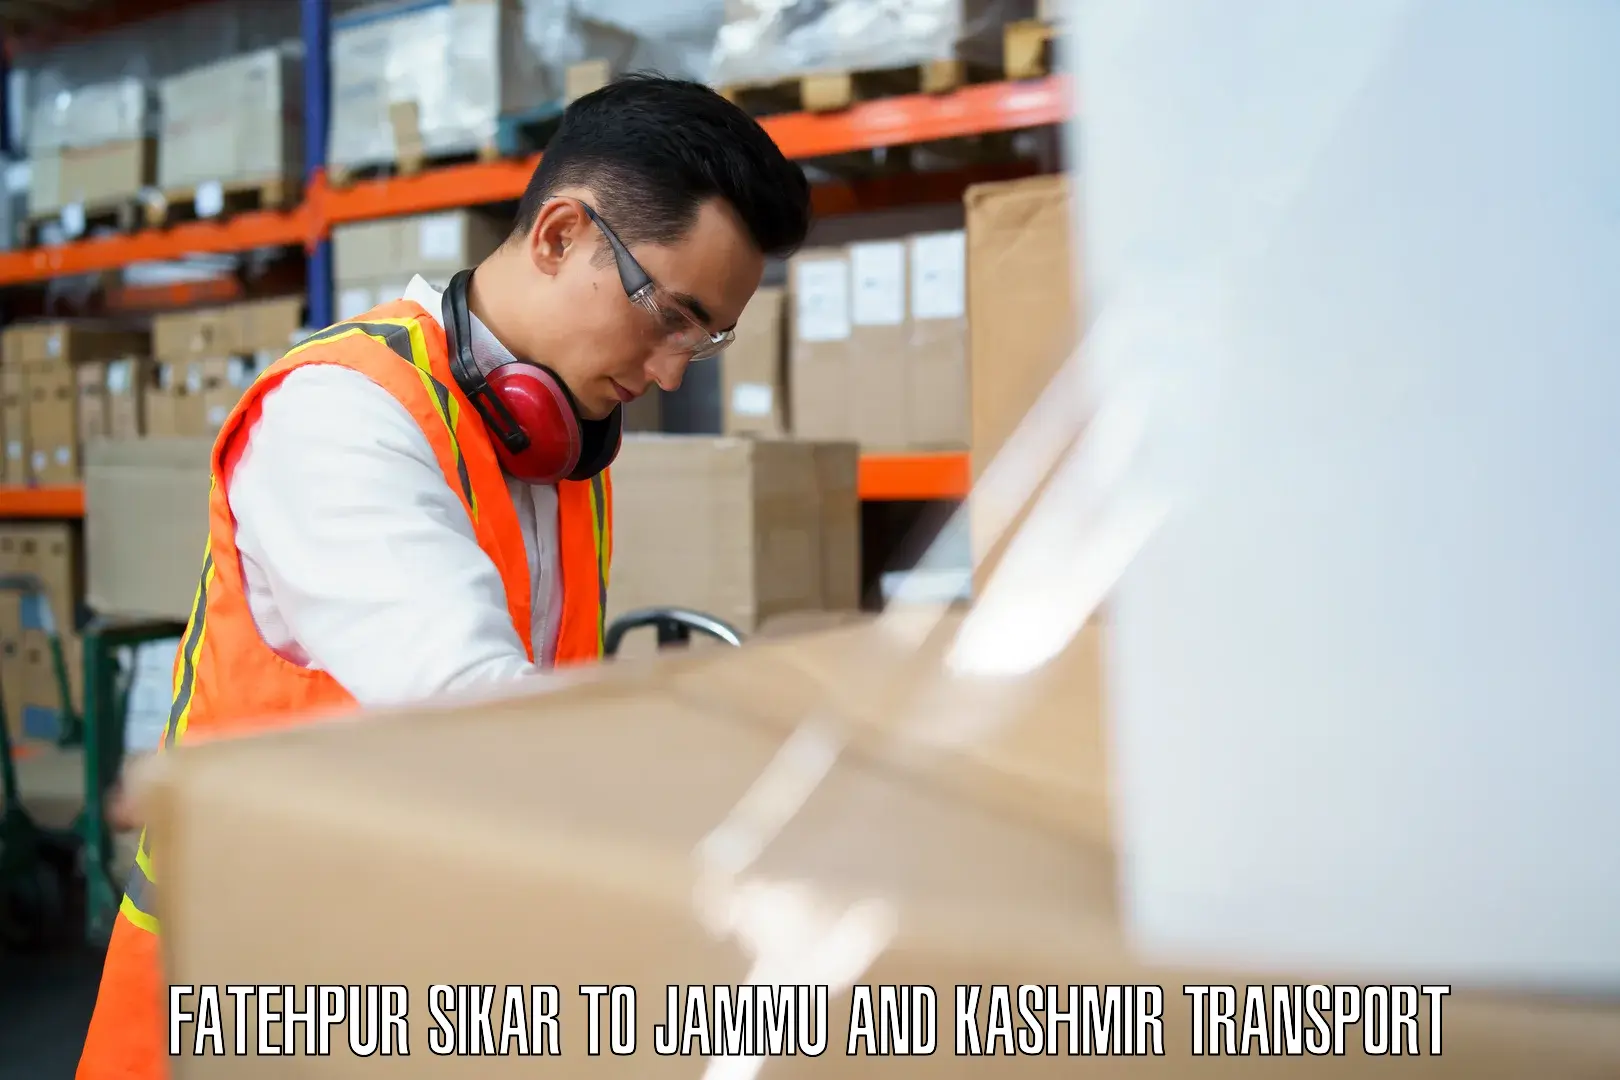 Air freight transport services Fatehpur Sikar to Pulwama